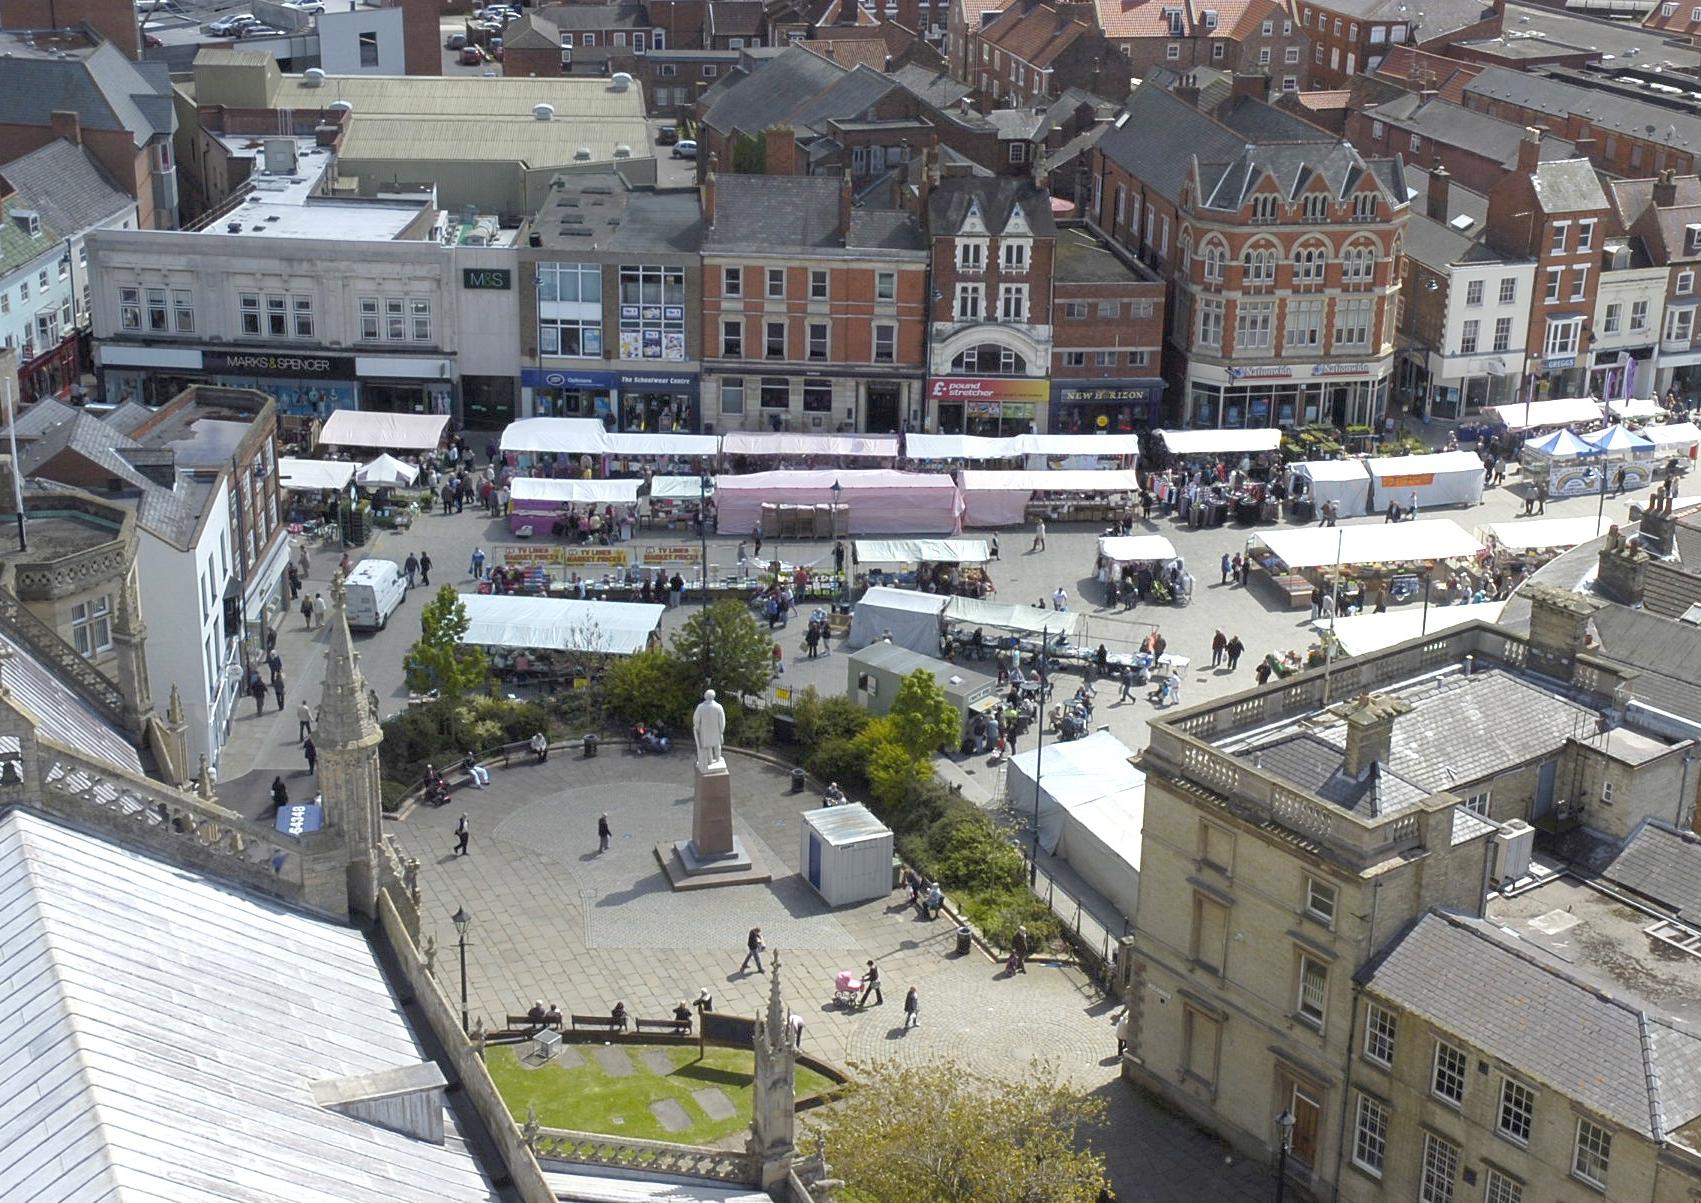 A £2 million re-vamp of Boston Market Place finished in 2012 after 11 months' work. Feedback was initially positive, but gave way to concern over such issues as illegal parking and vehicles causing obstructions.